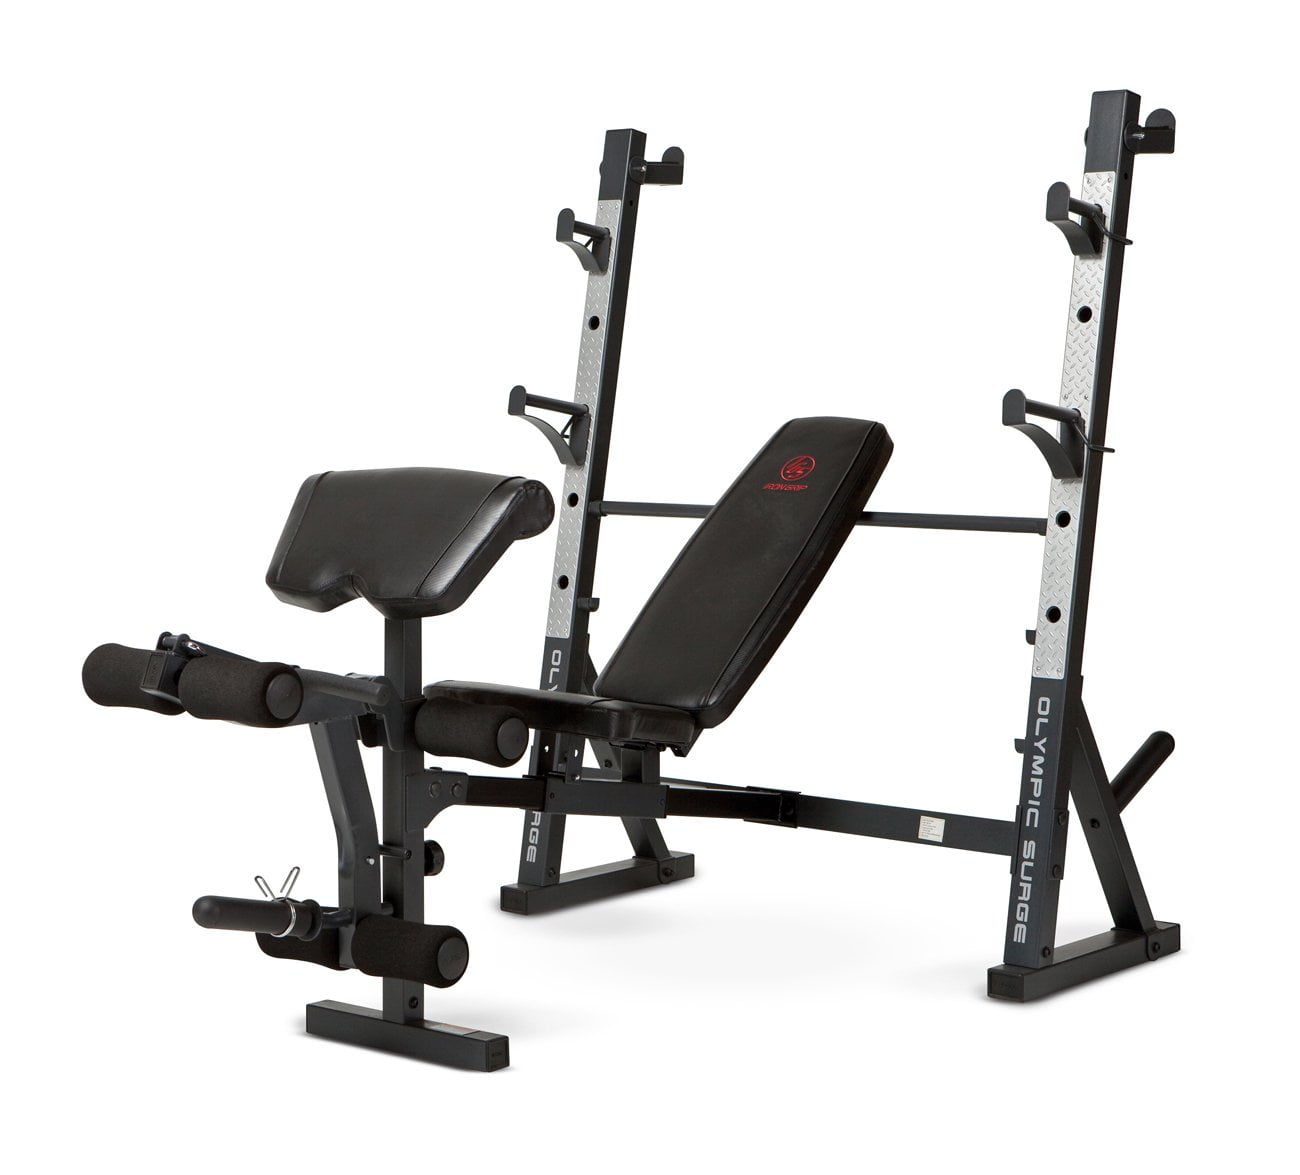 Marcy Diamond MD389 Elite Classic Multipurpose Home Gym Workout Weight Bench 